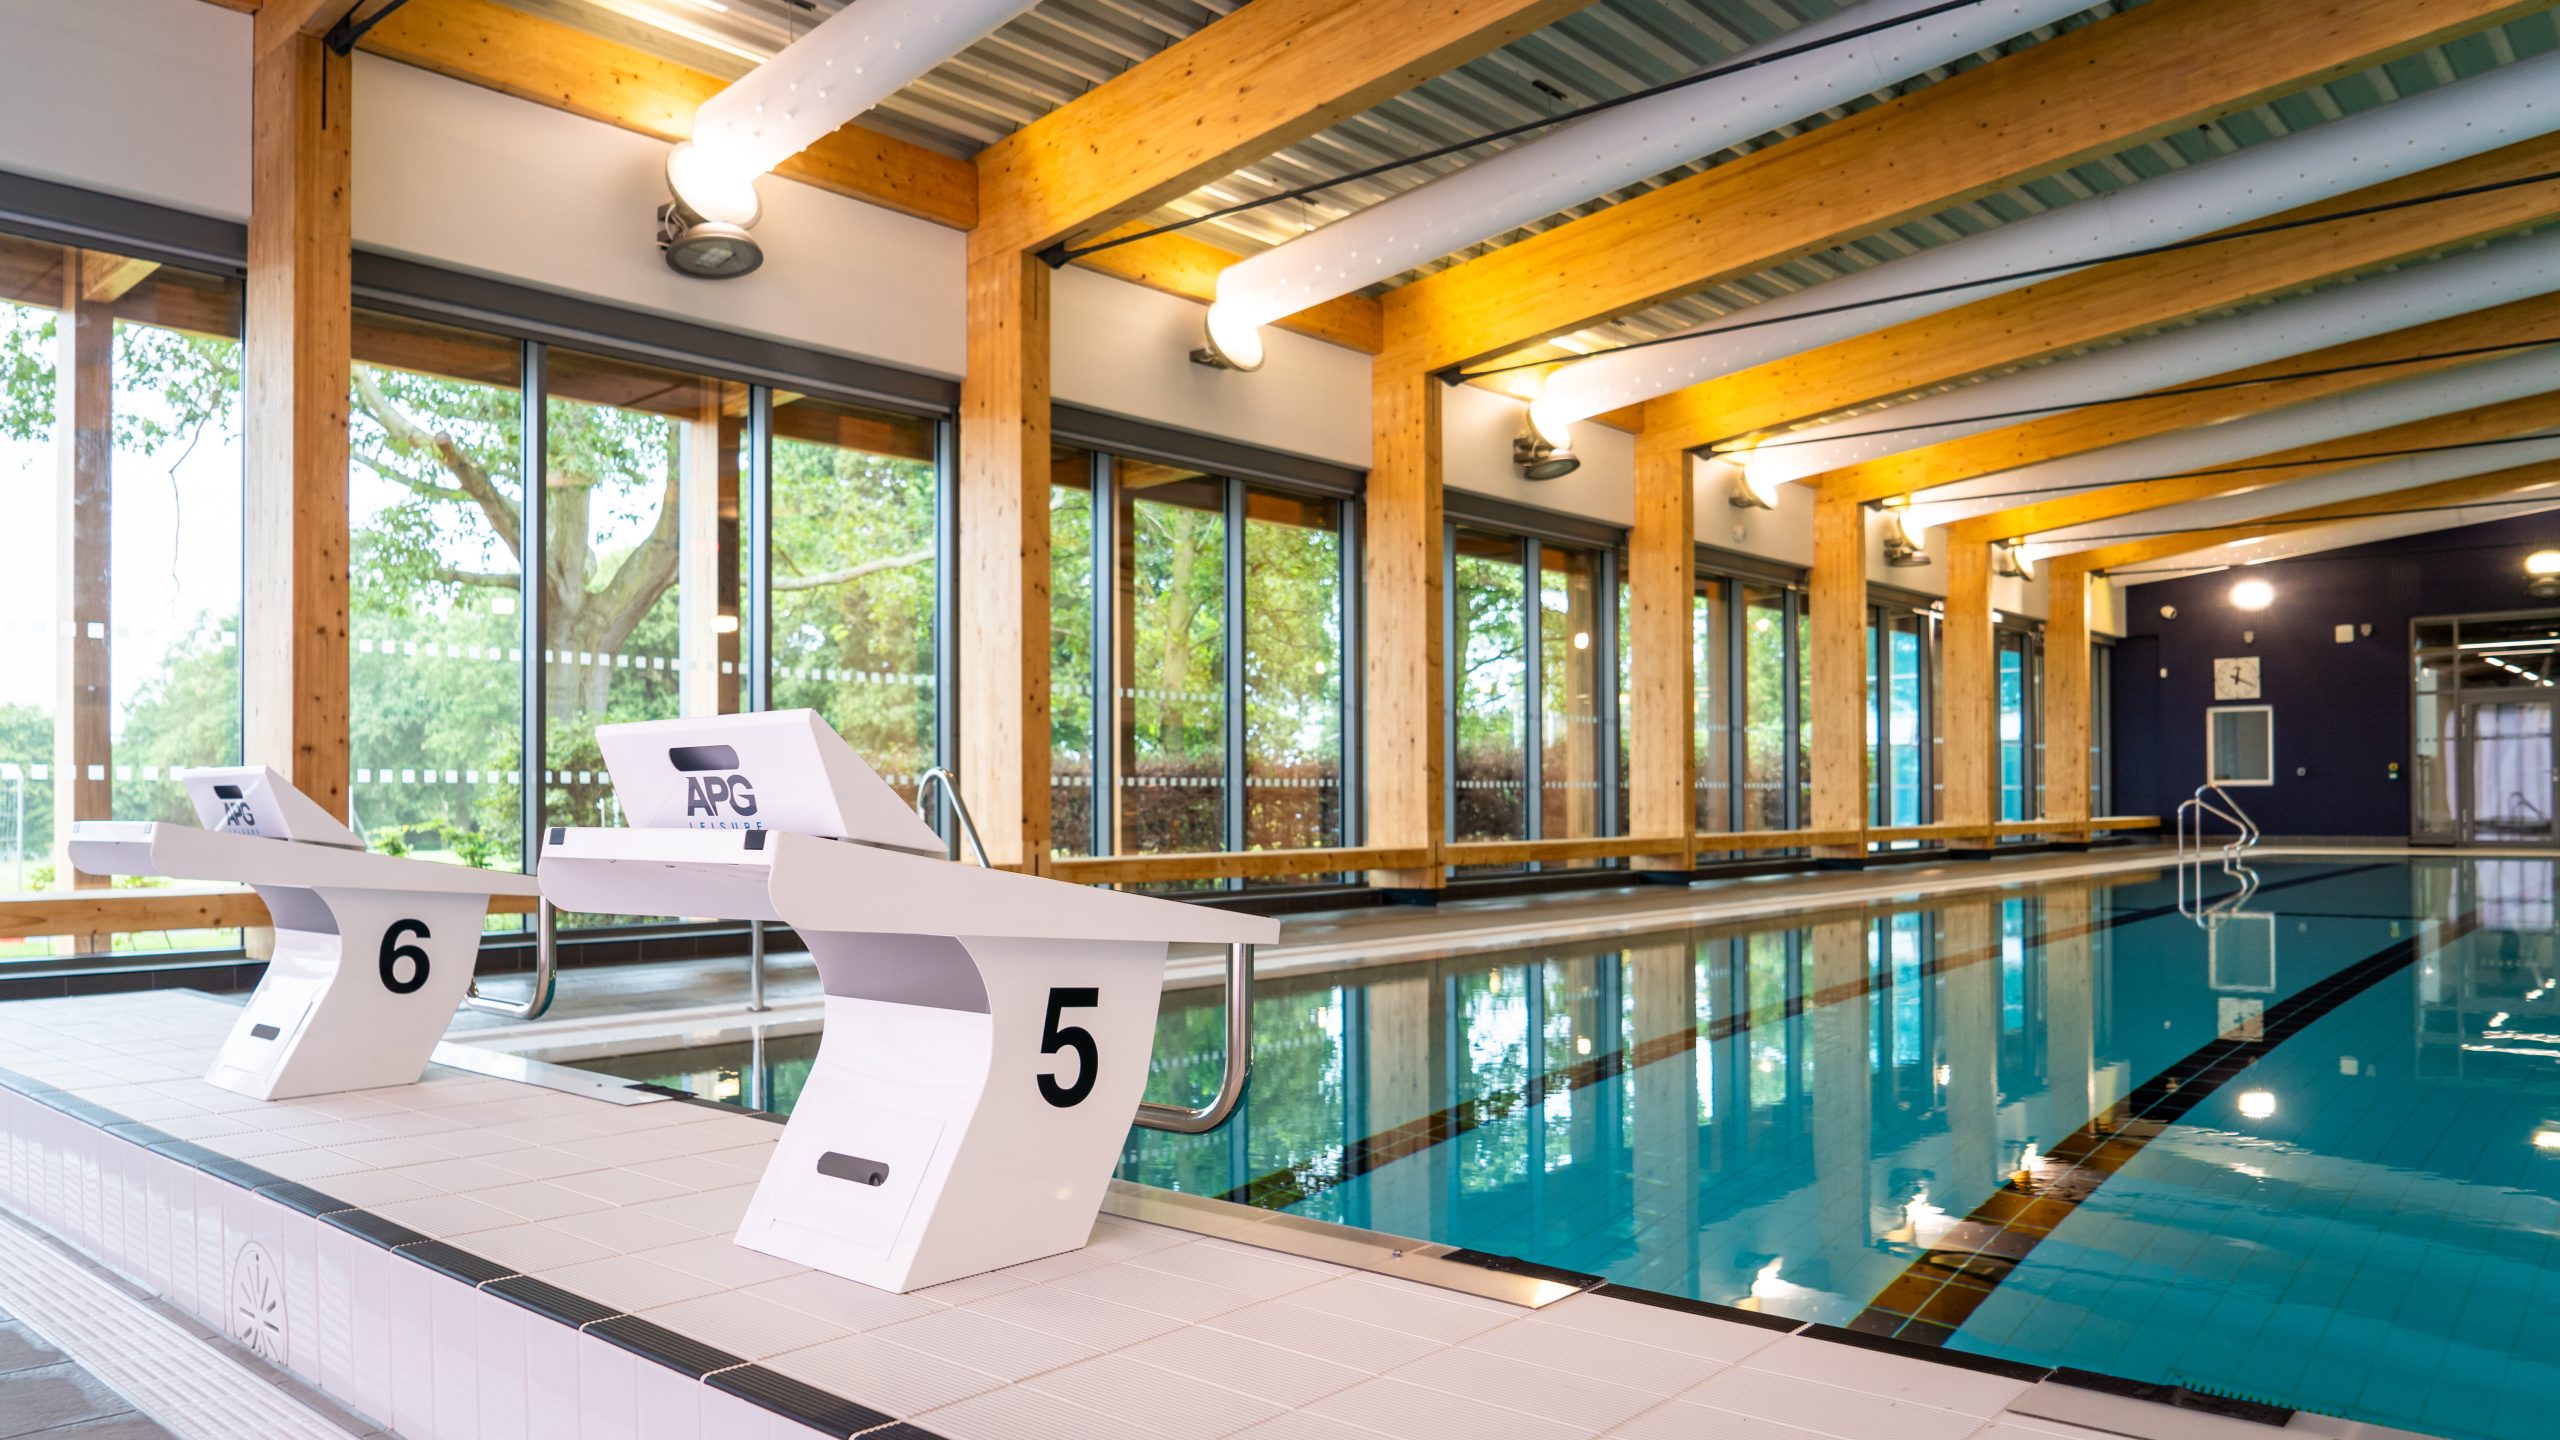 Chigwell School Swimming Pool Hall with Diving Boards